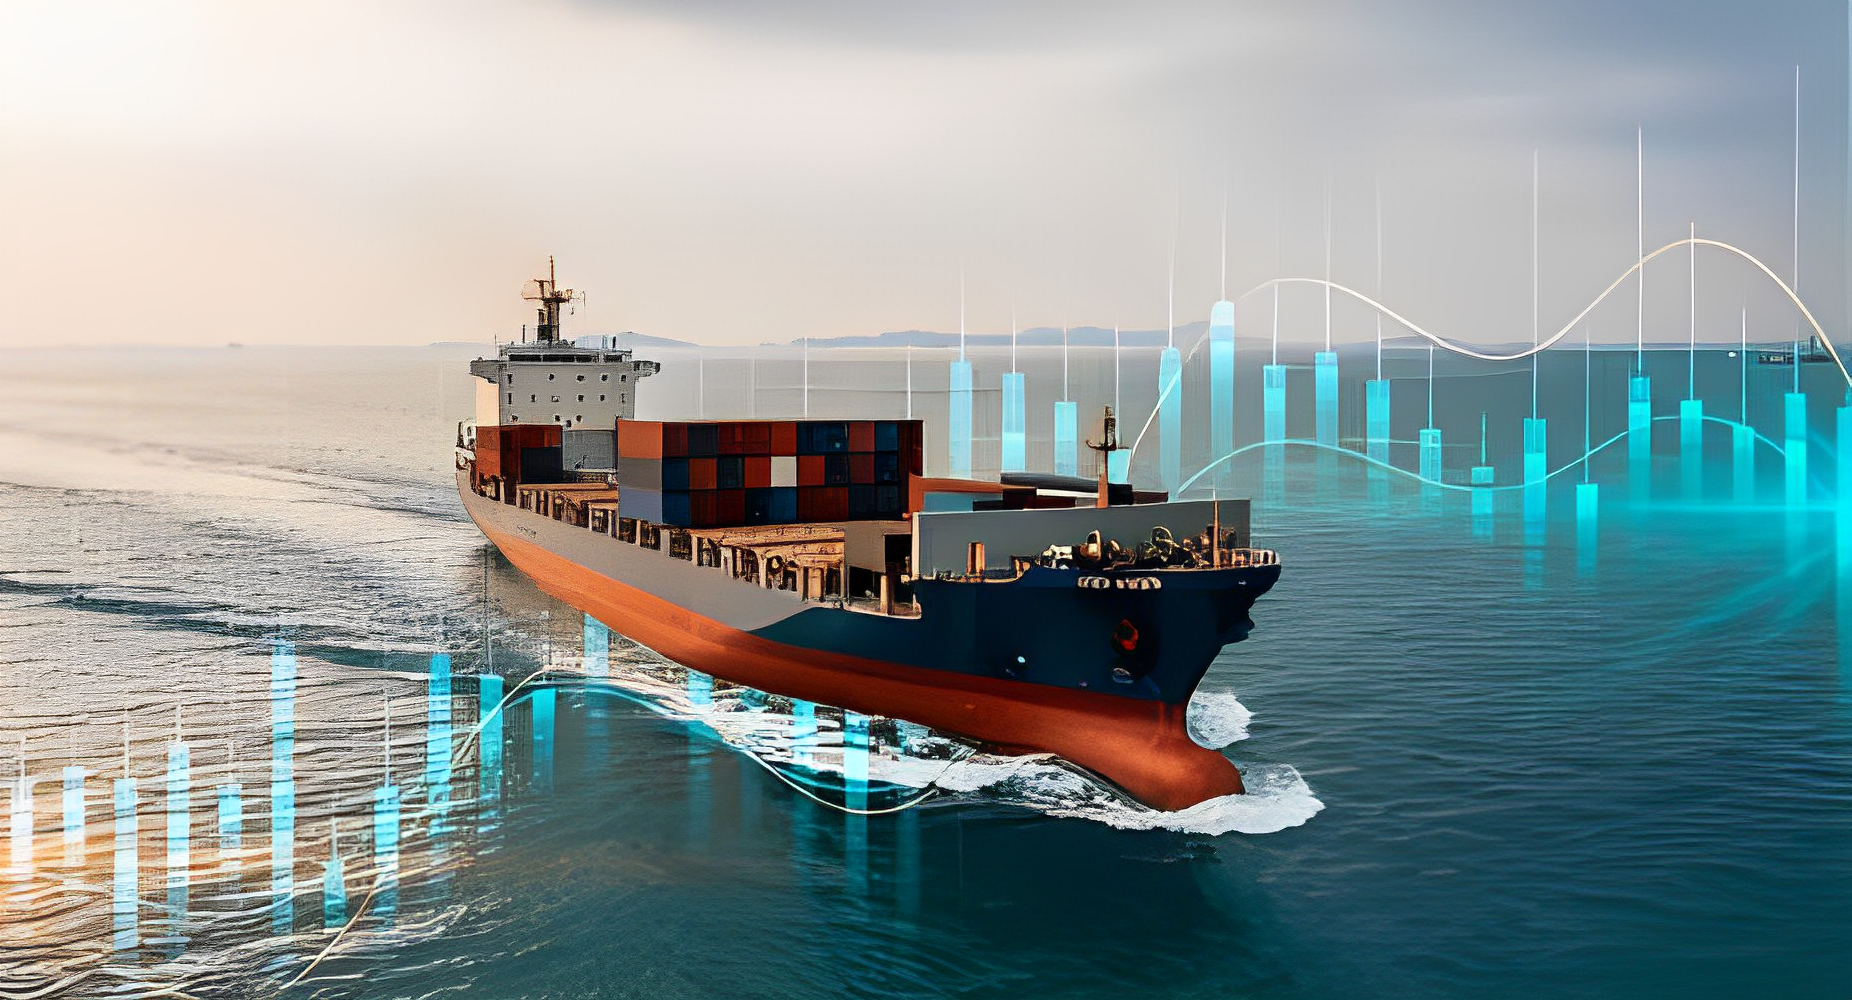 The Future of Freight: Emerging Trends in Air, Sea, and Land Transport